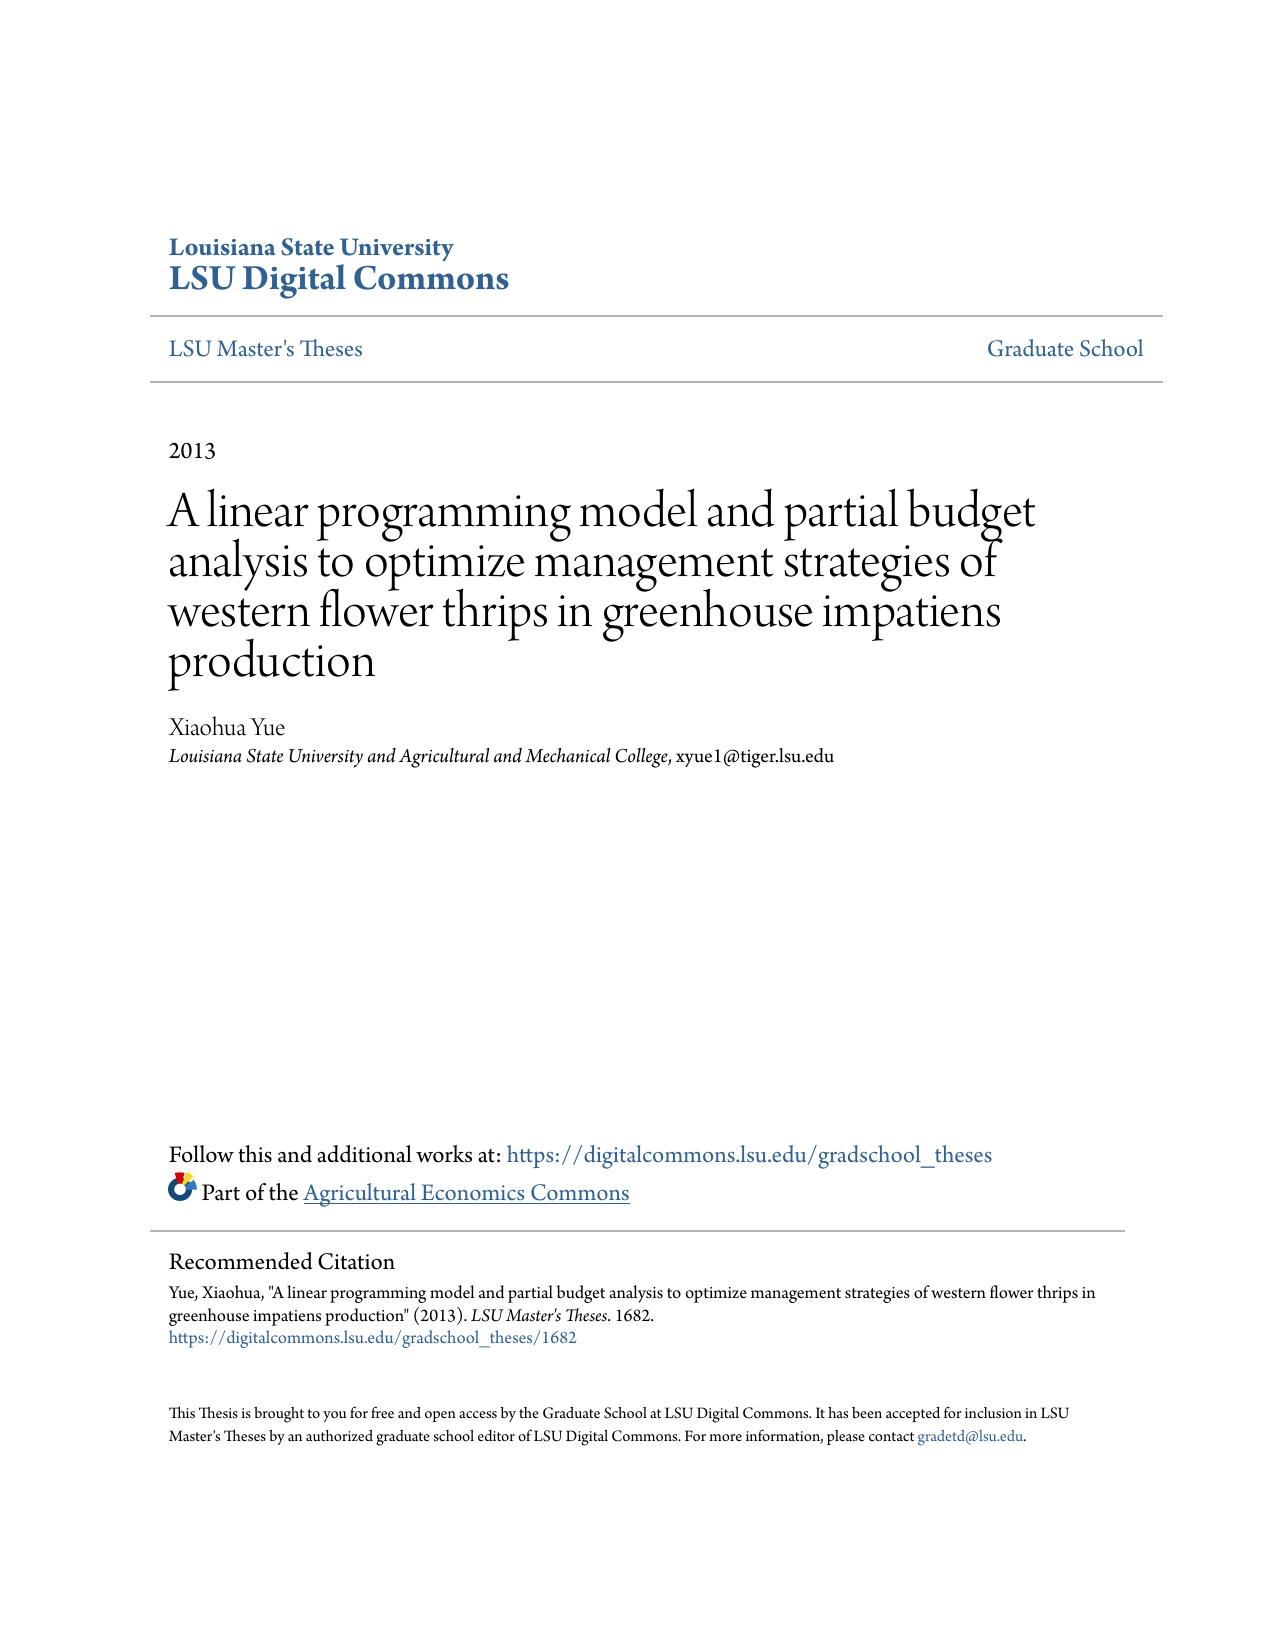 A linear programming model and partial budget analysis to optimize management strategies of western flower thrips in greenhouse impatiens production